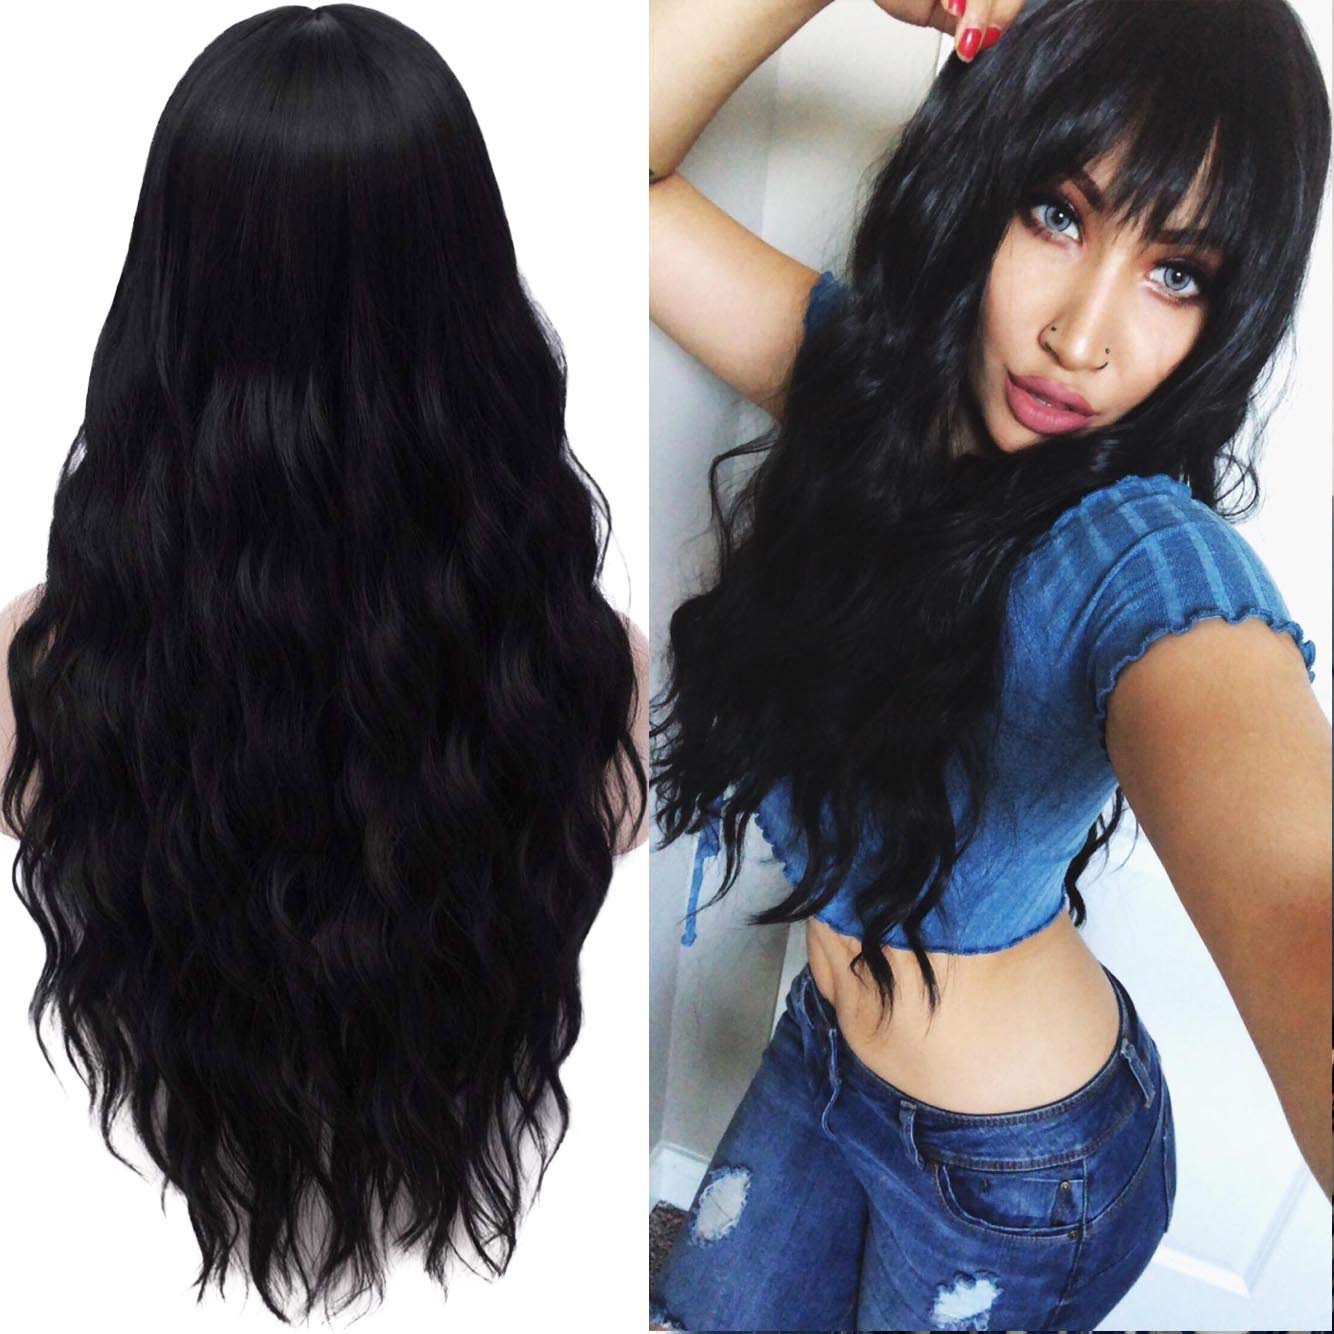 Price:$18.99     Women's Long Black Wig with Bangs 28inch Kinky Curly Body Wavy Hair Wigs for Girl Heat Friendly Synthetic Party Wig 030BK   Beauty